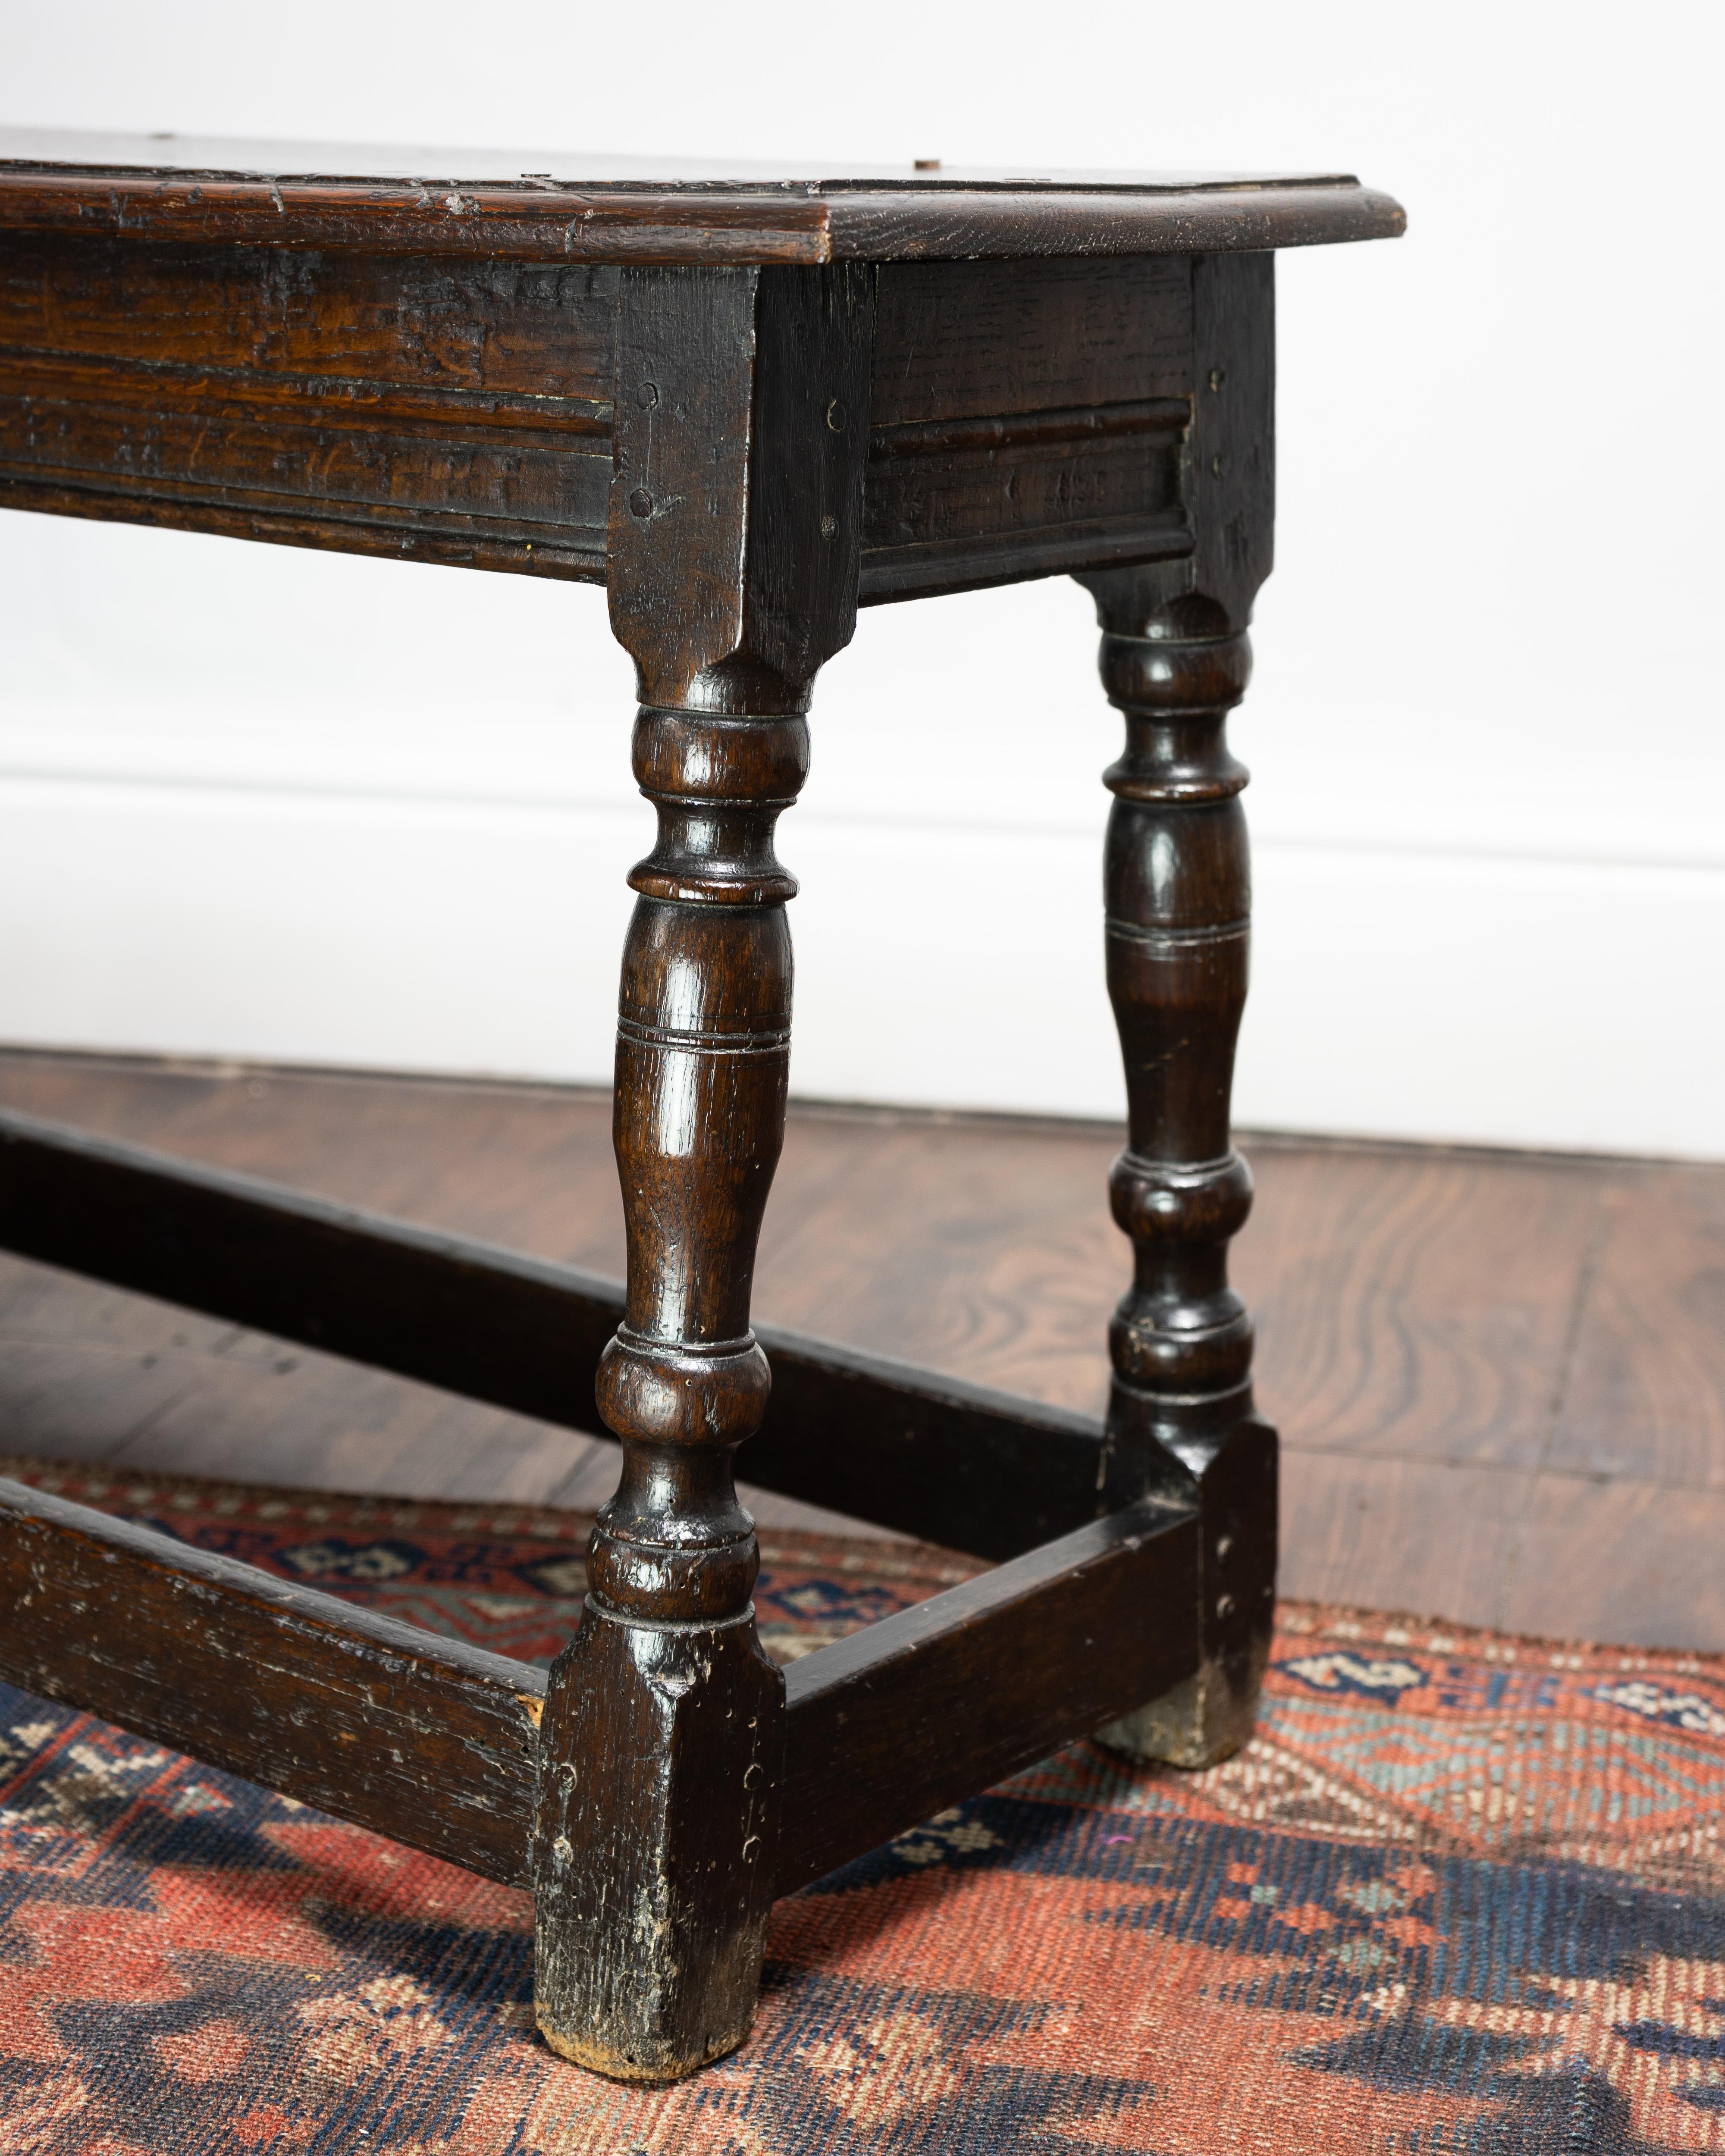 British 17th Century, James I Joined Oak Bench, England, Circa 1603 - 1625 For Sale